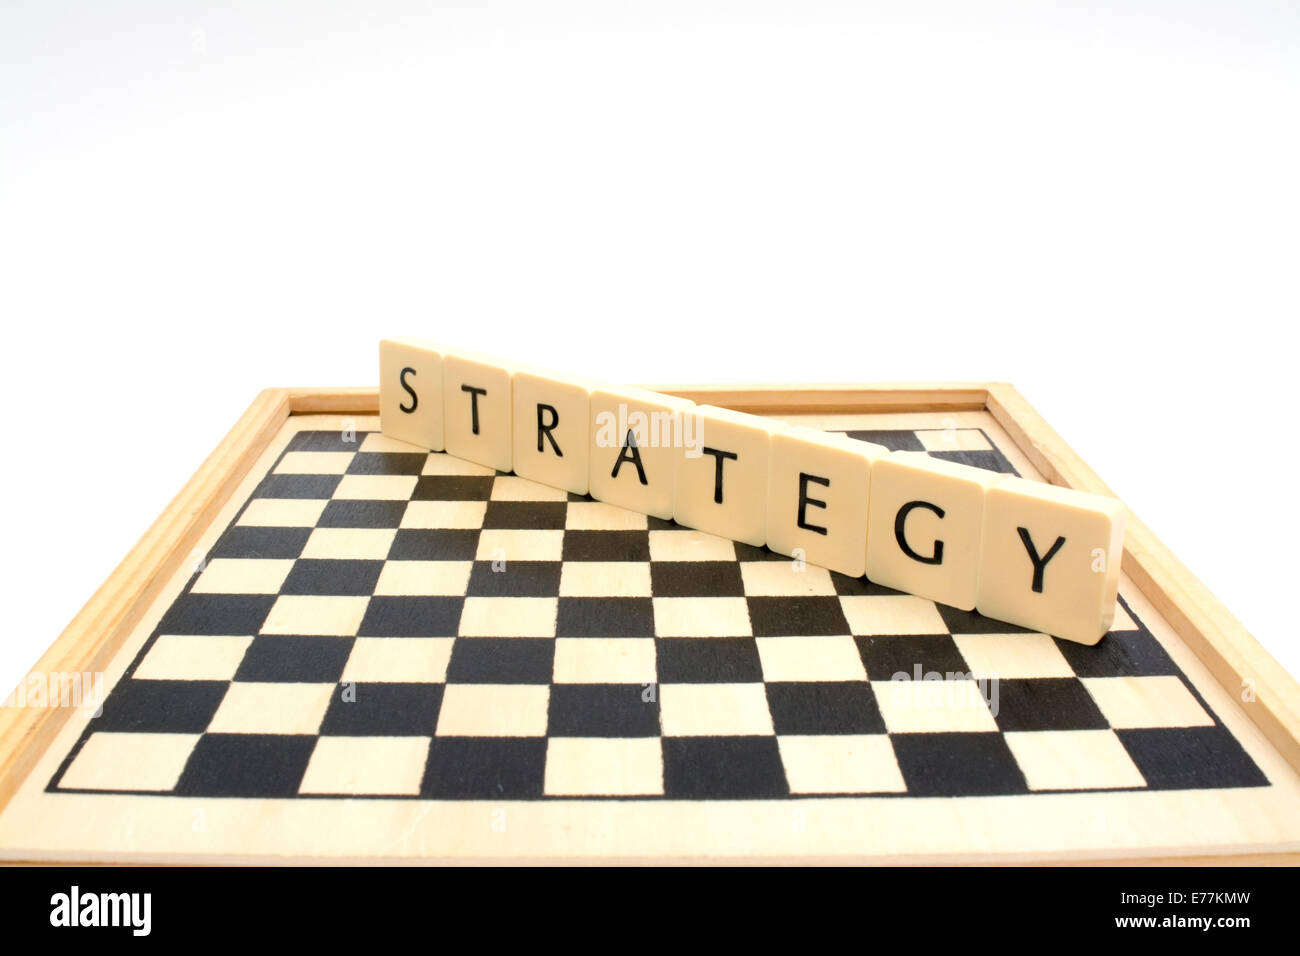 Chess board and strategy word together. Stock Photo